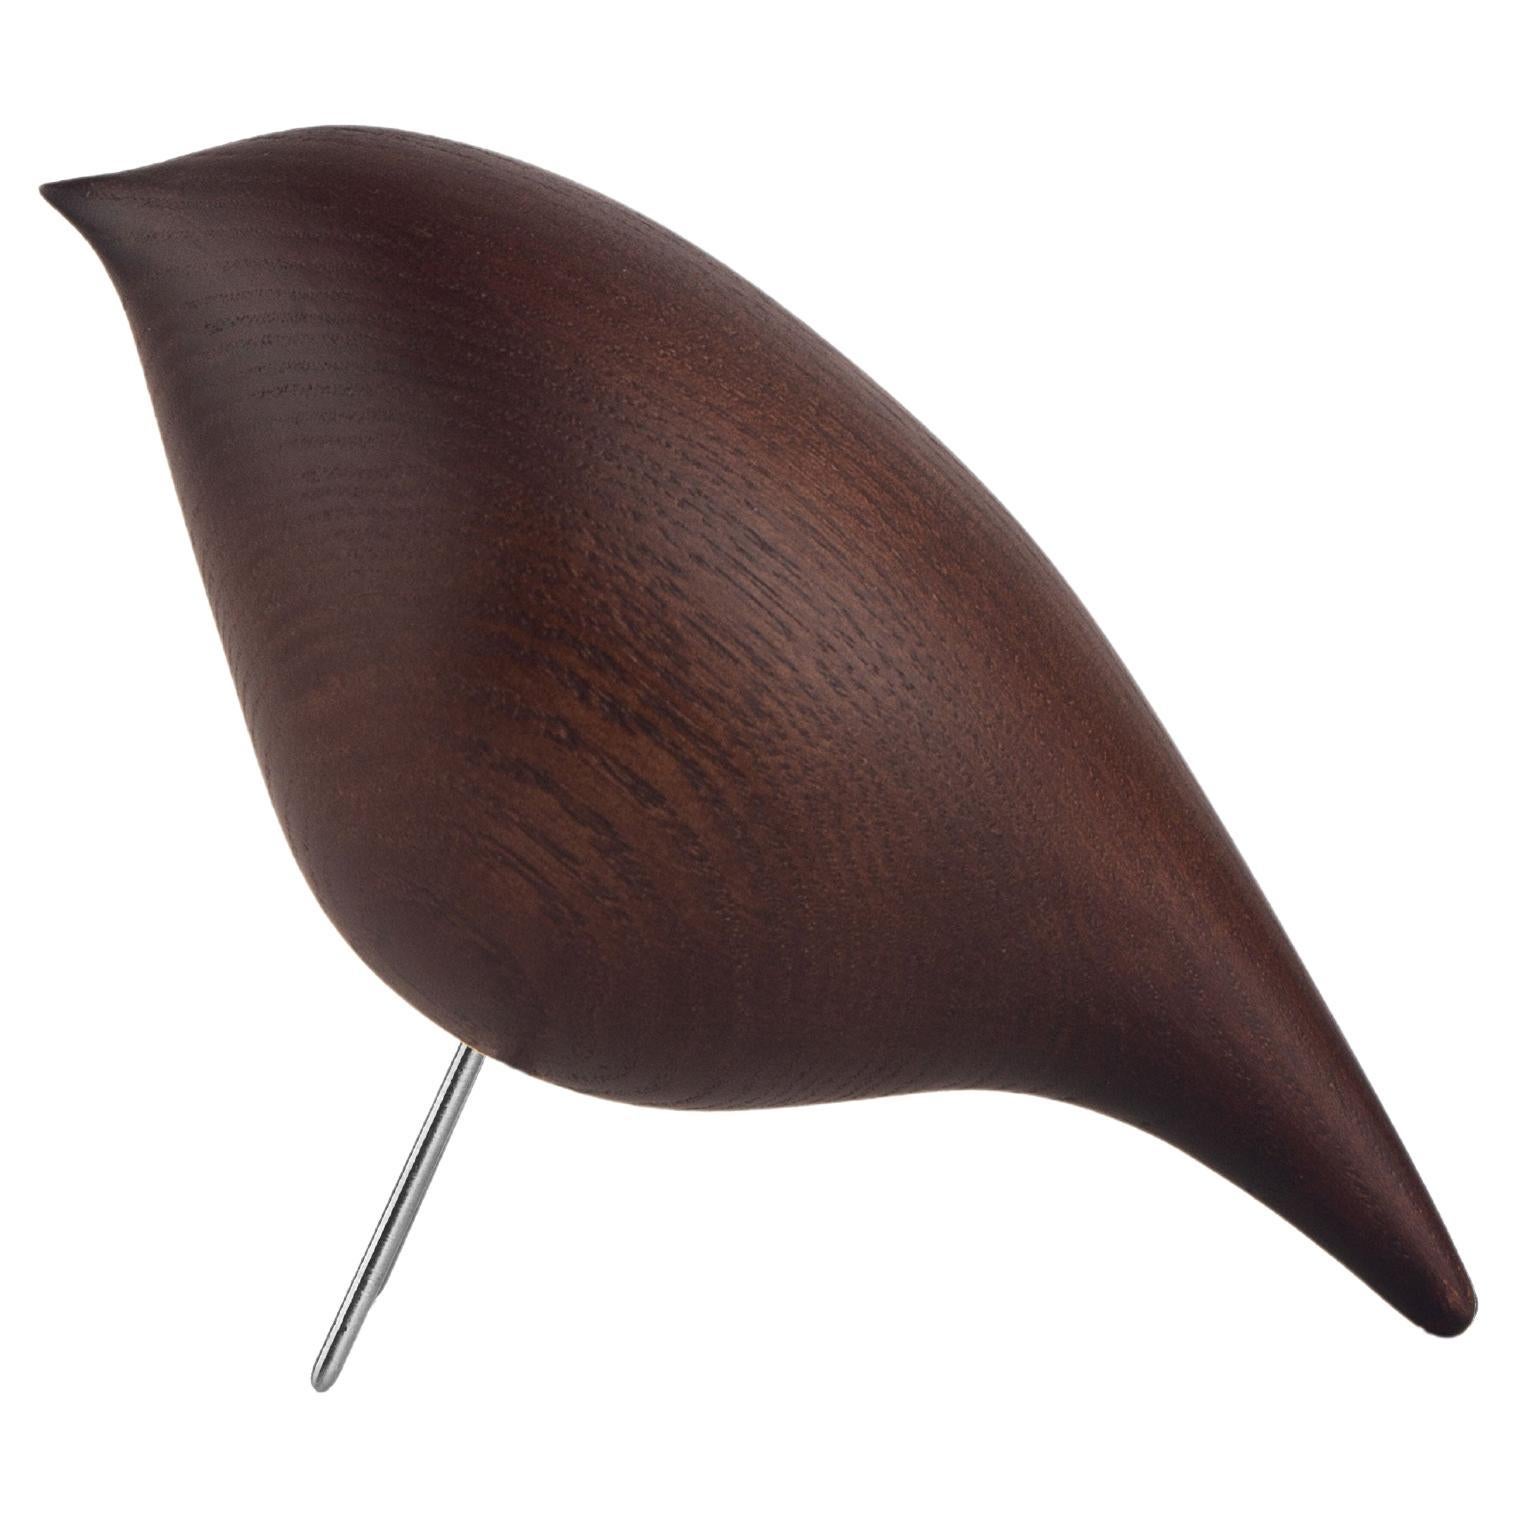 Handcrafted Tweety Decorative Bird CS2 by Noom in Brown Ashwood (in stock)